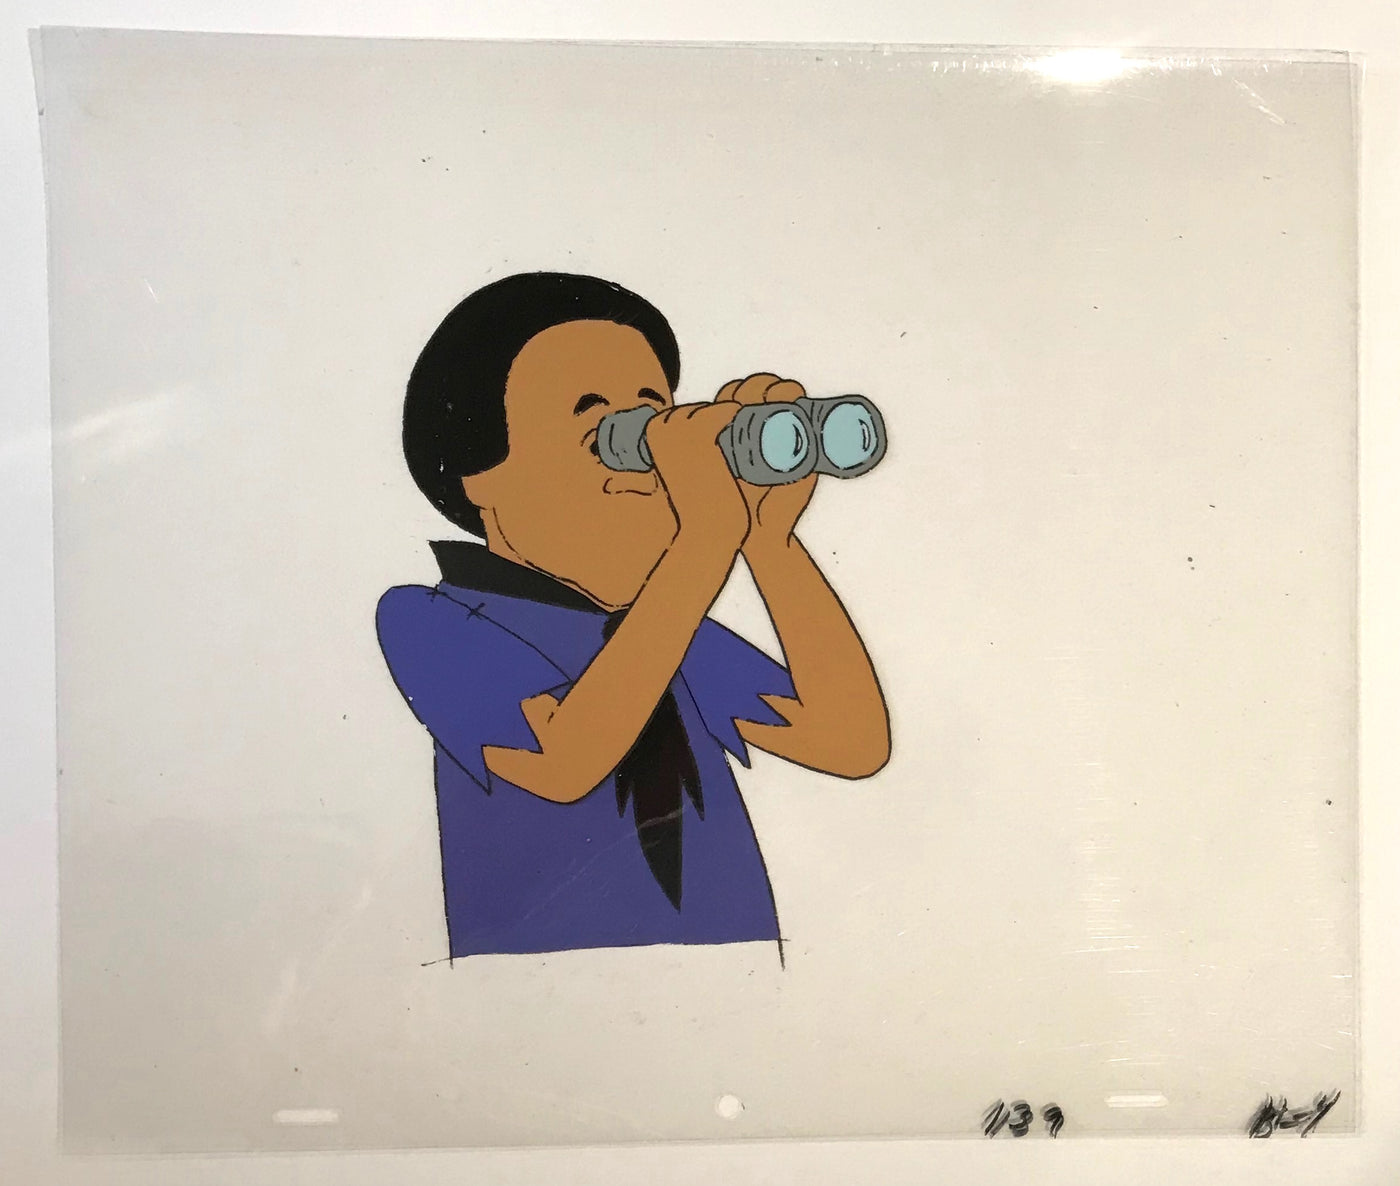 Hanna Barbera Production Cel and Drawing featuring Bryant Gumbel